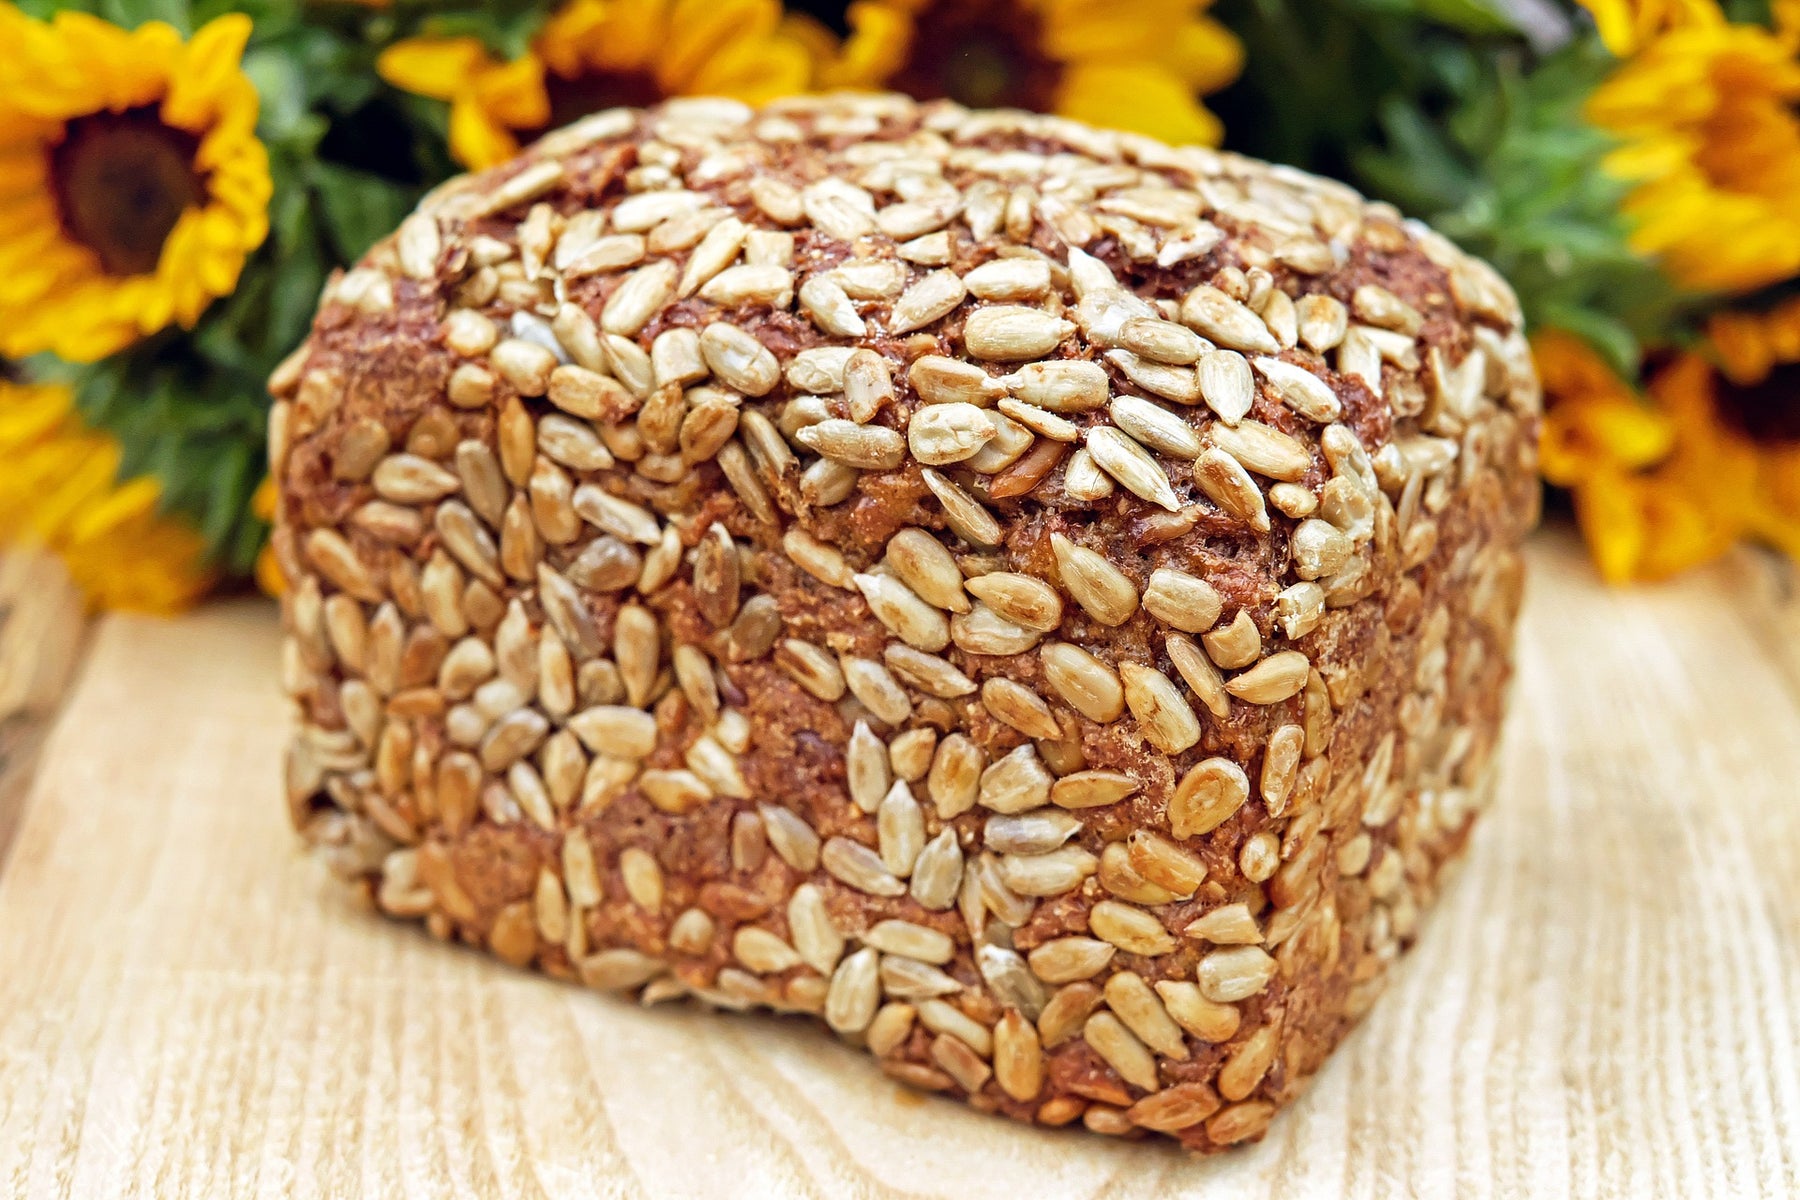 Bread with seeds on a wooden table and sunflowers in the back